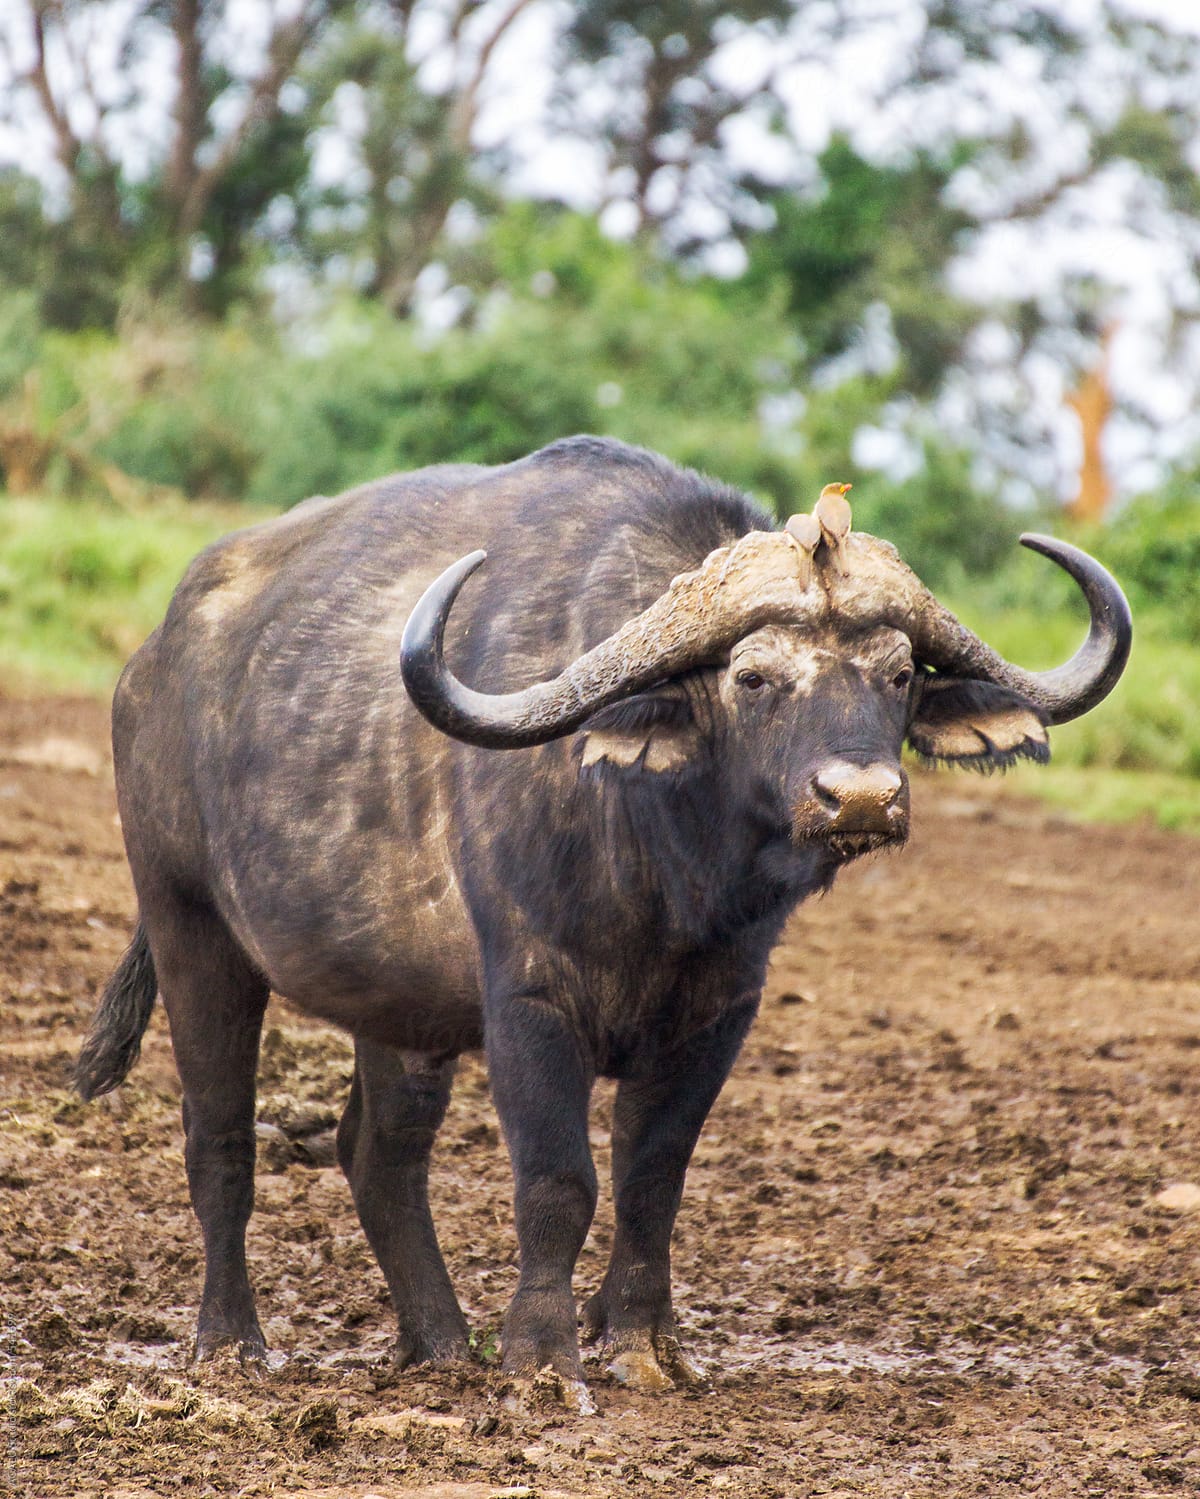 Buffalo with two birds on the head